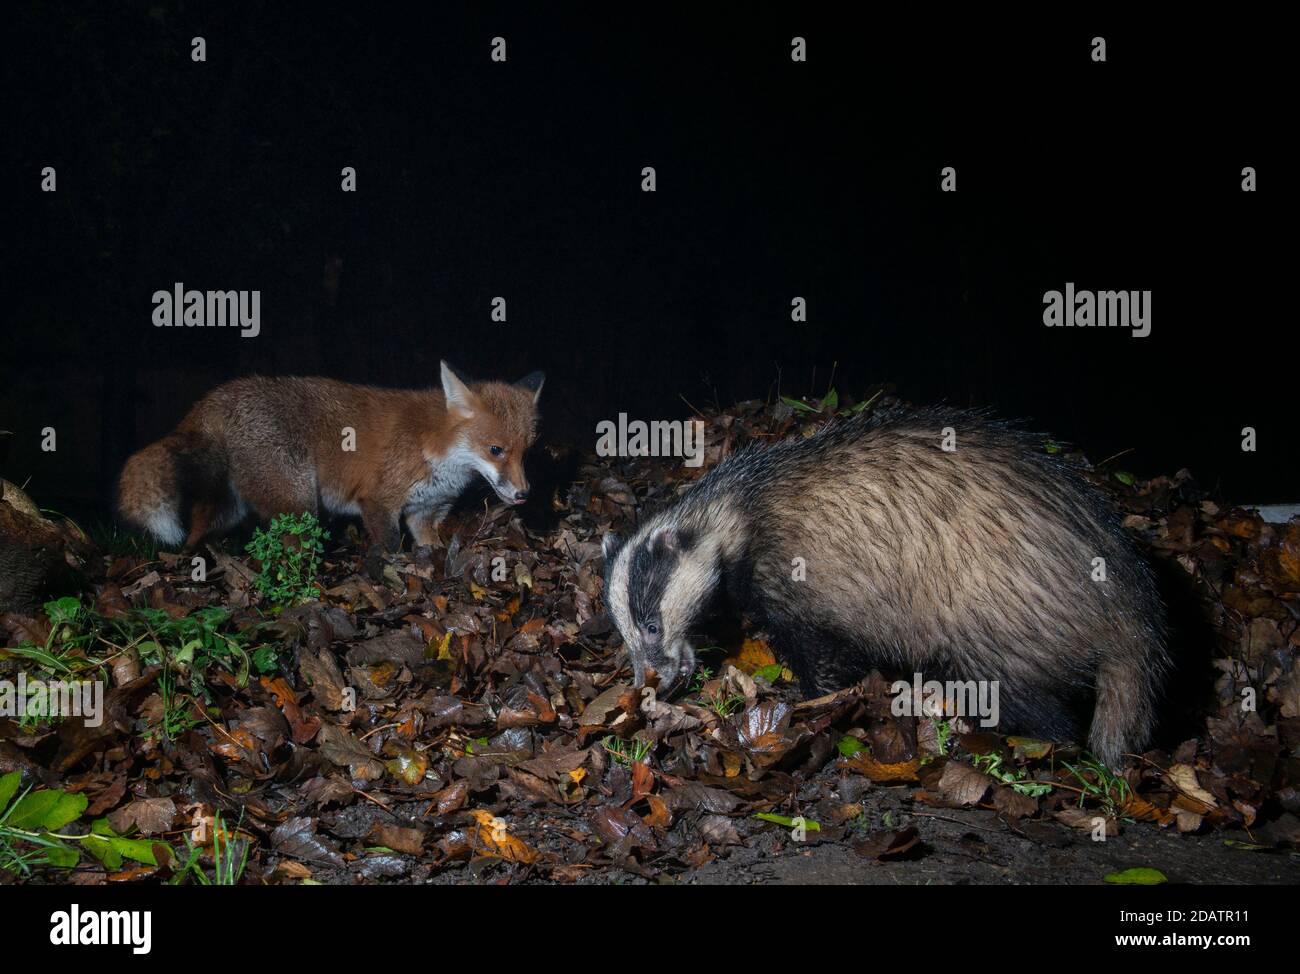 Fox and badger together searching amongst a pile of dead leaves Stock Photo